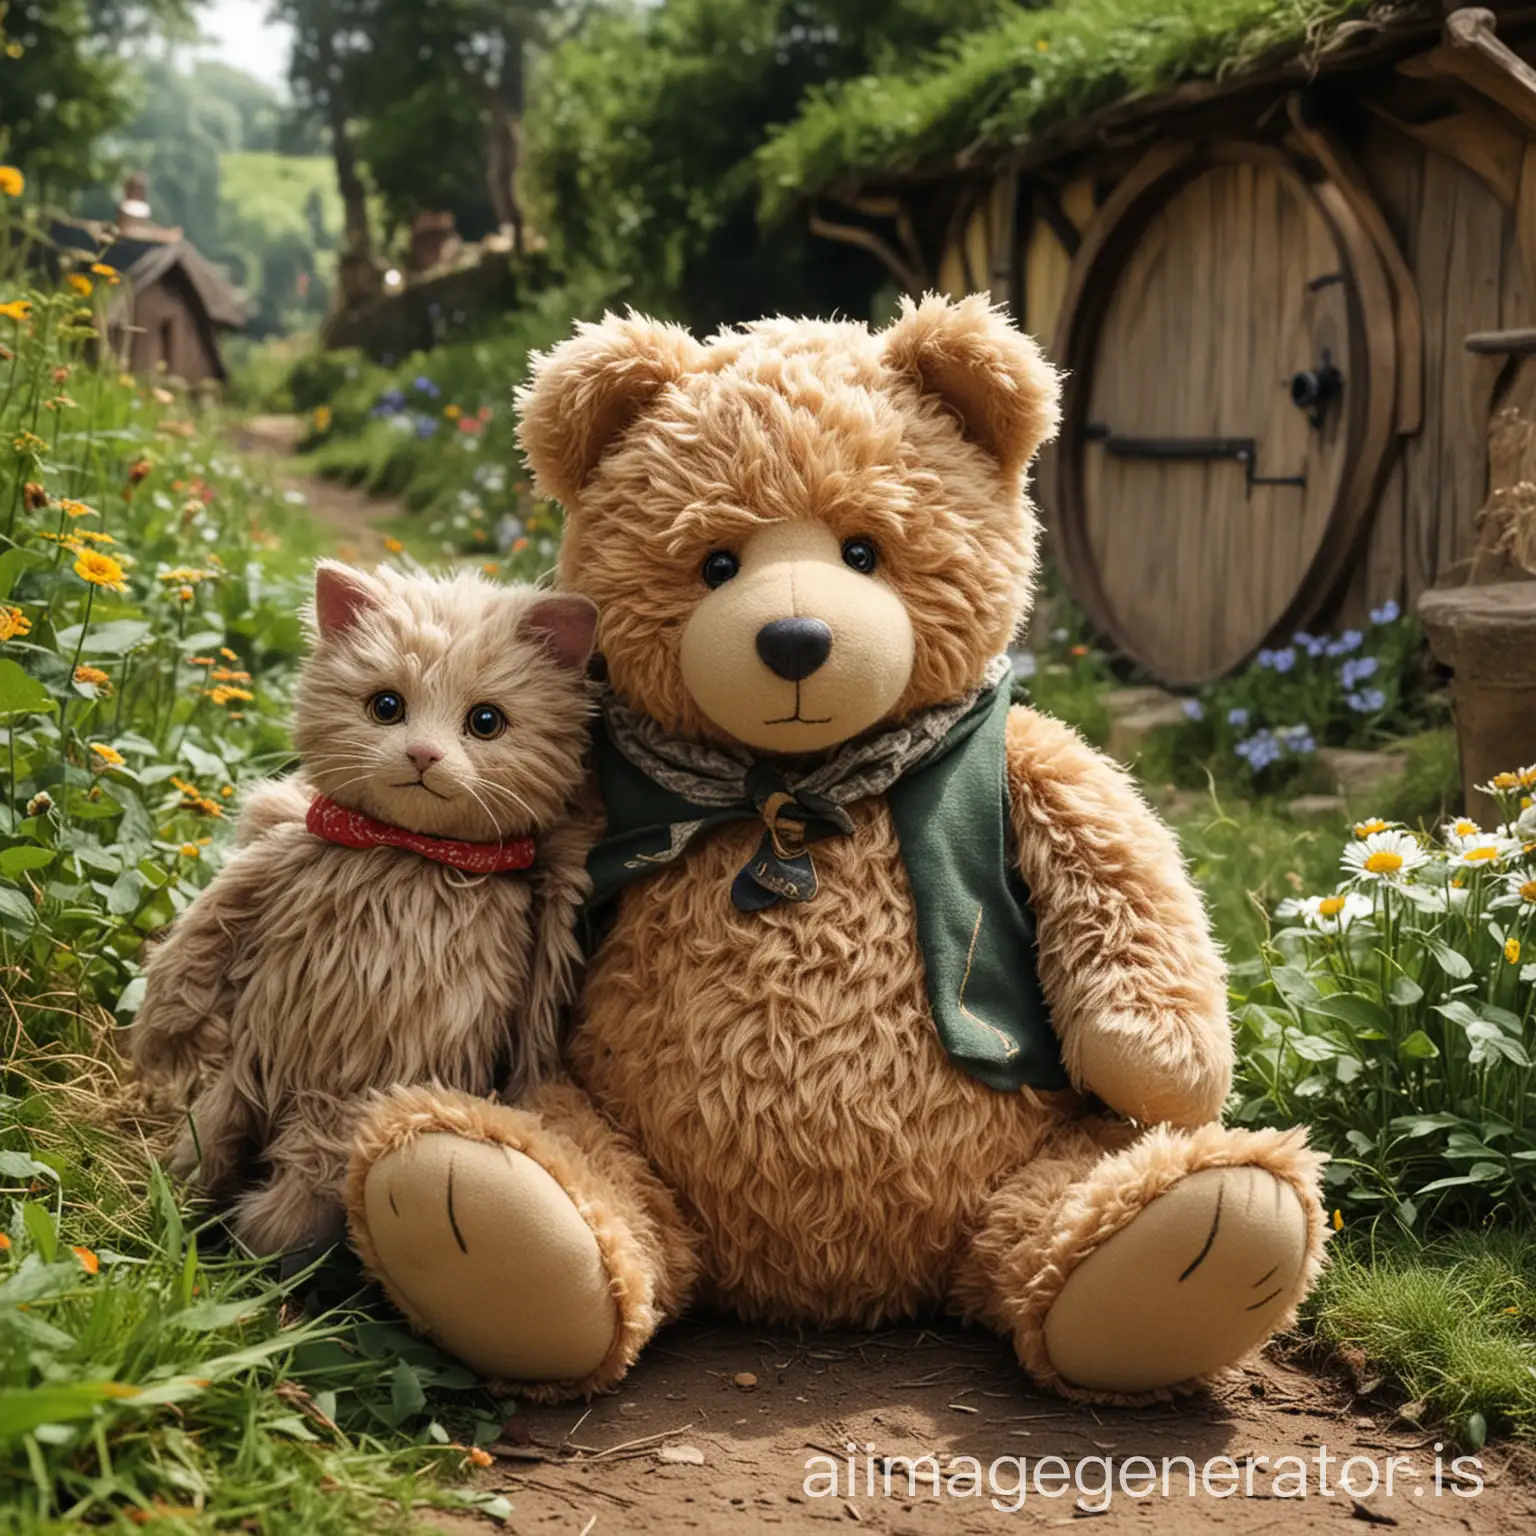 Teddy bear and cat in the Shire